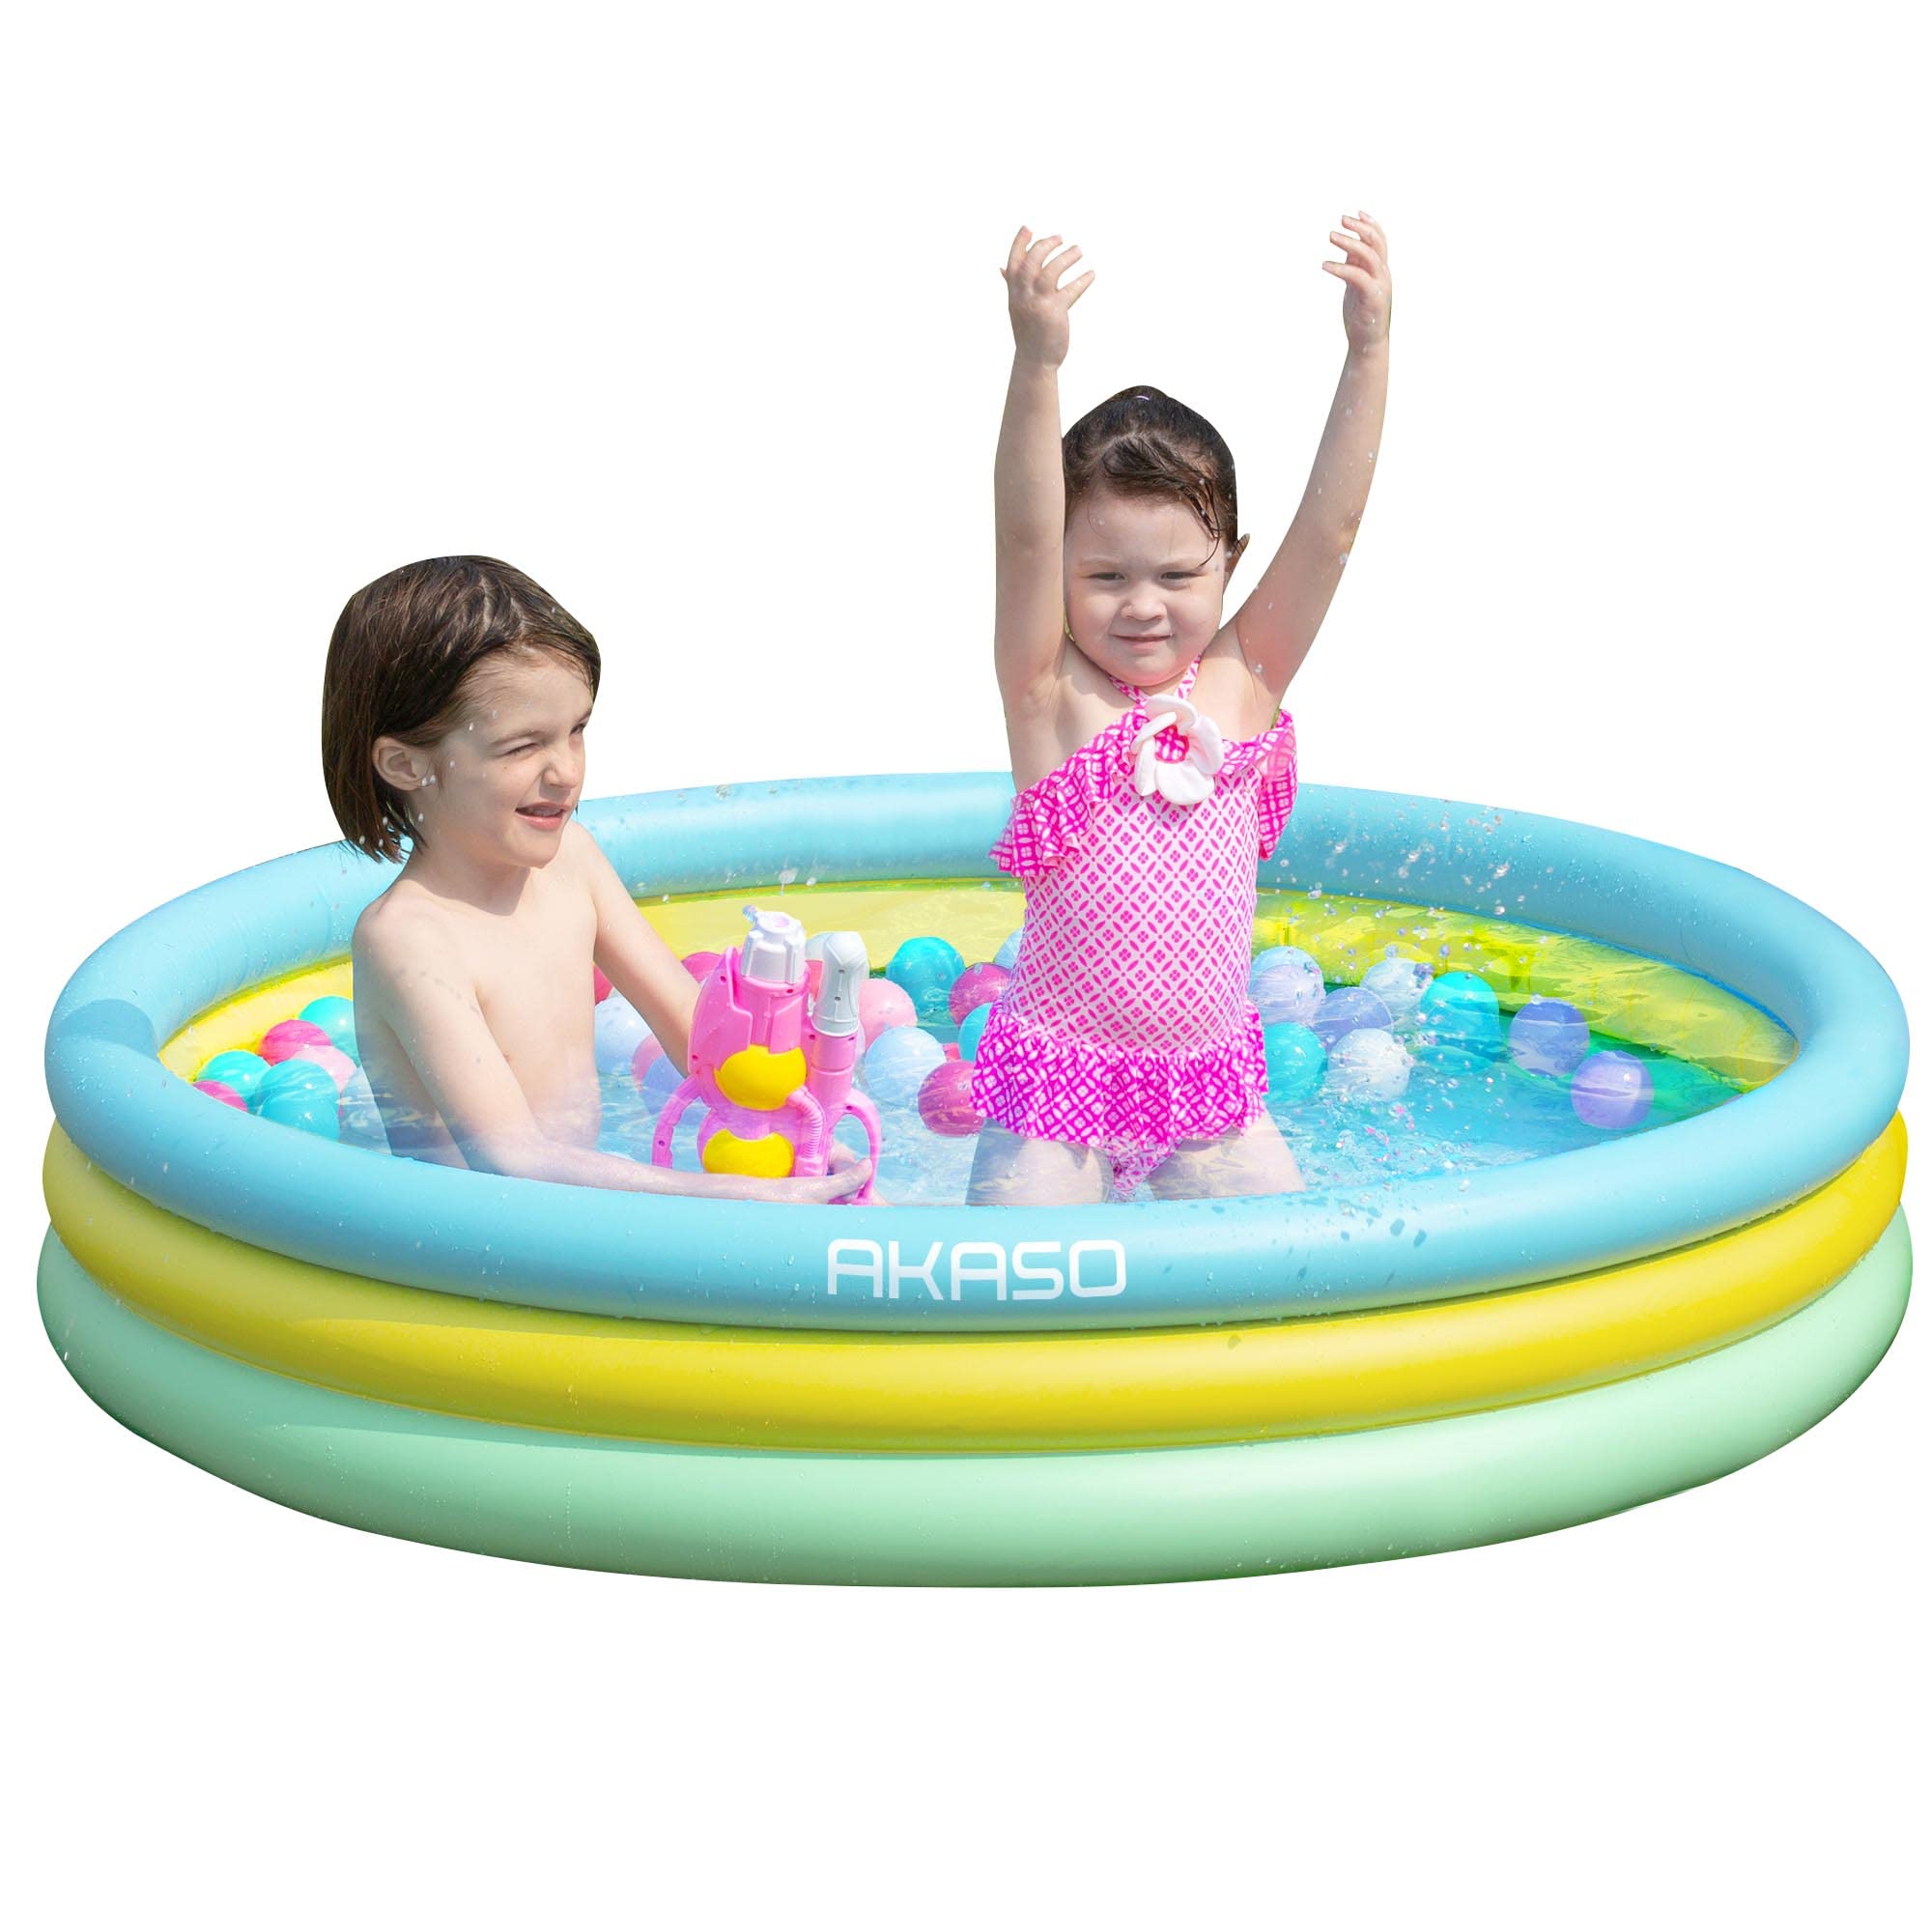 AKASO Inflatable Kiddie Pool for Toddlers Baby 59 x 13 Portable Blow Up Swimming Pool 3 Rings Child Paddling Pool for O